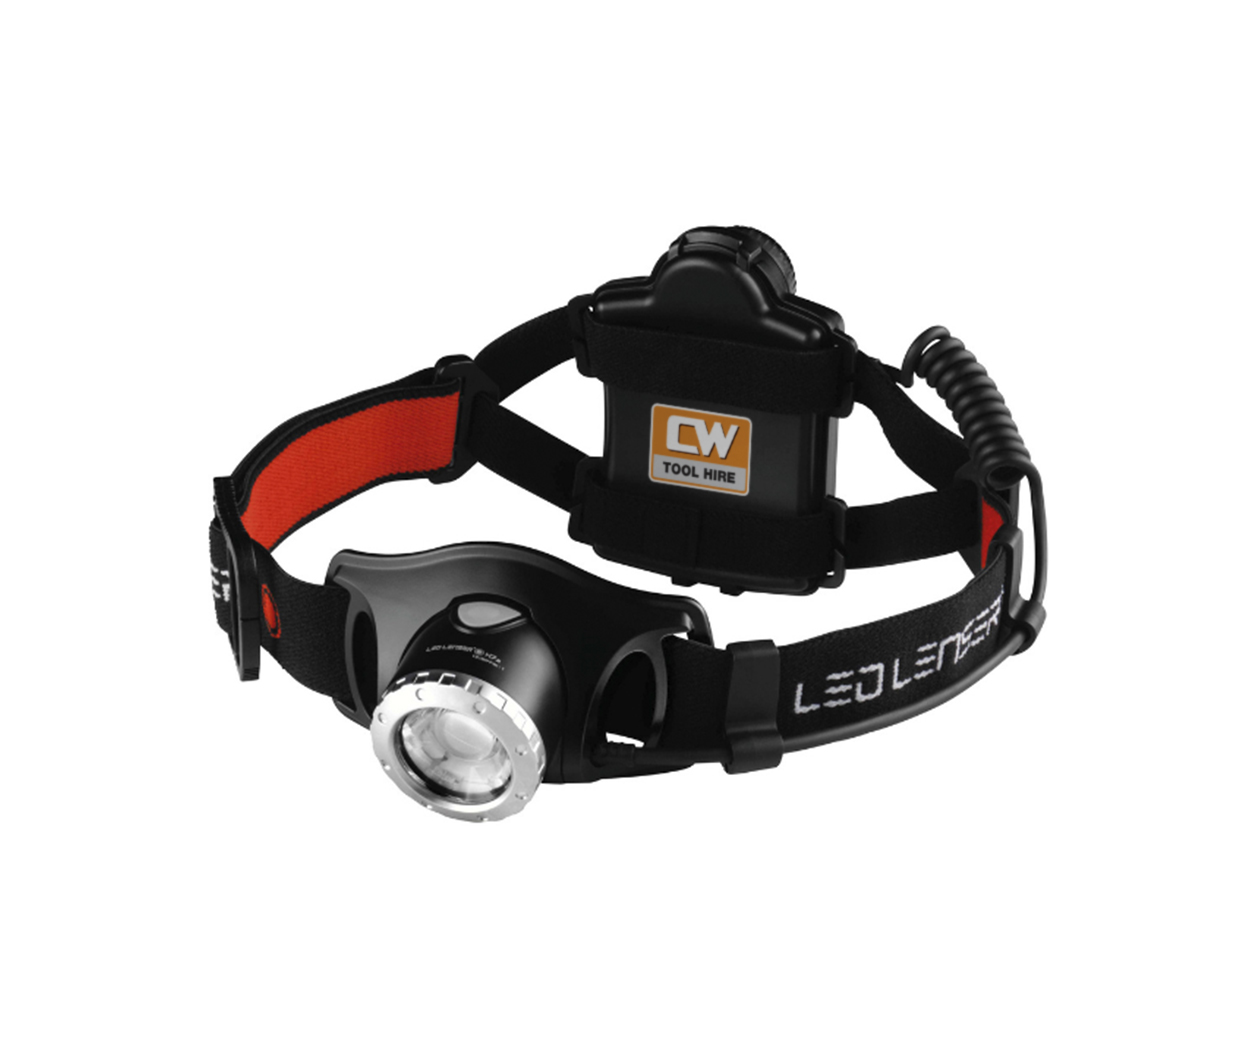 Safety - Head lamp